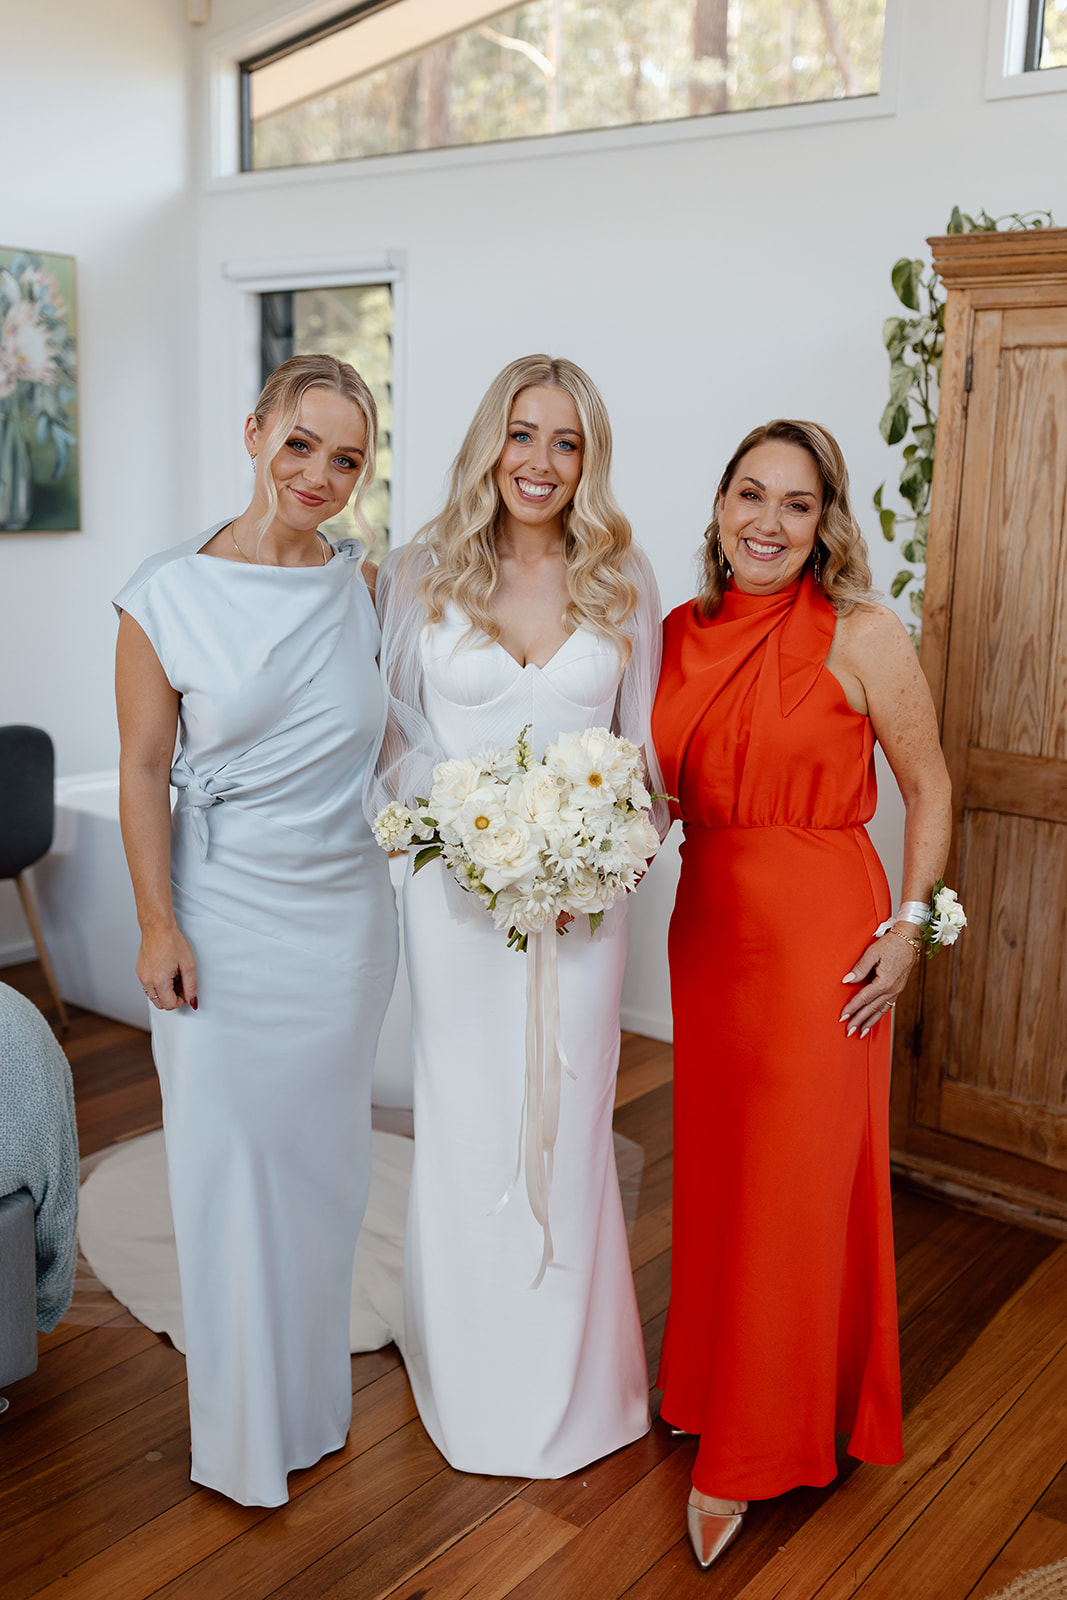 Bride with her mom and sister at the wedding in the South Coast Bawley Vale Estate